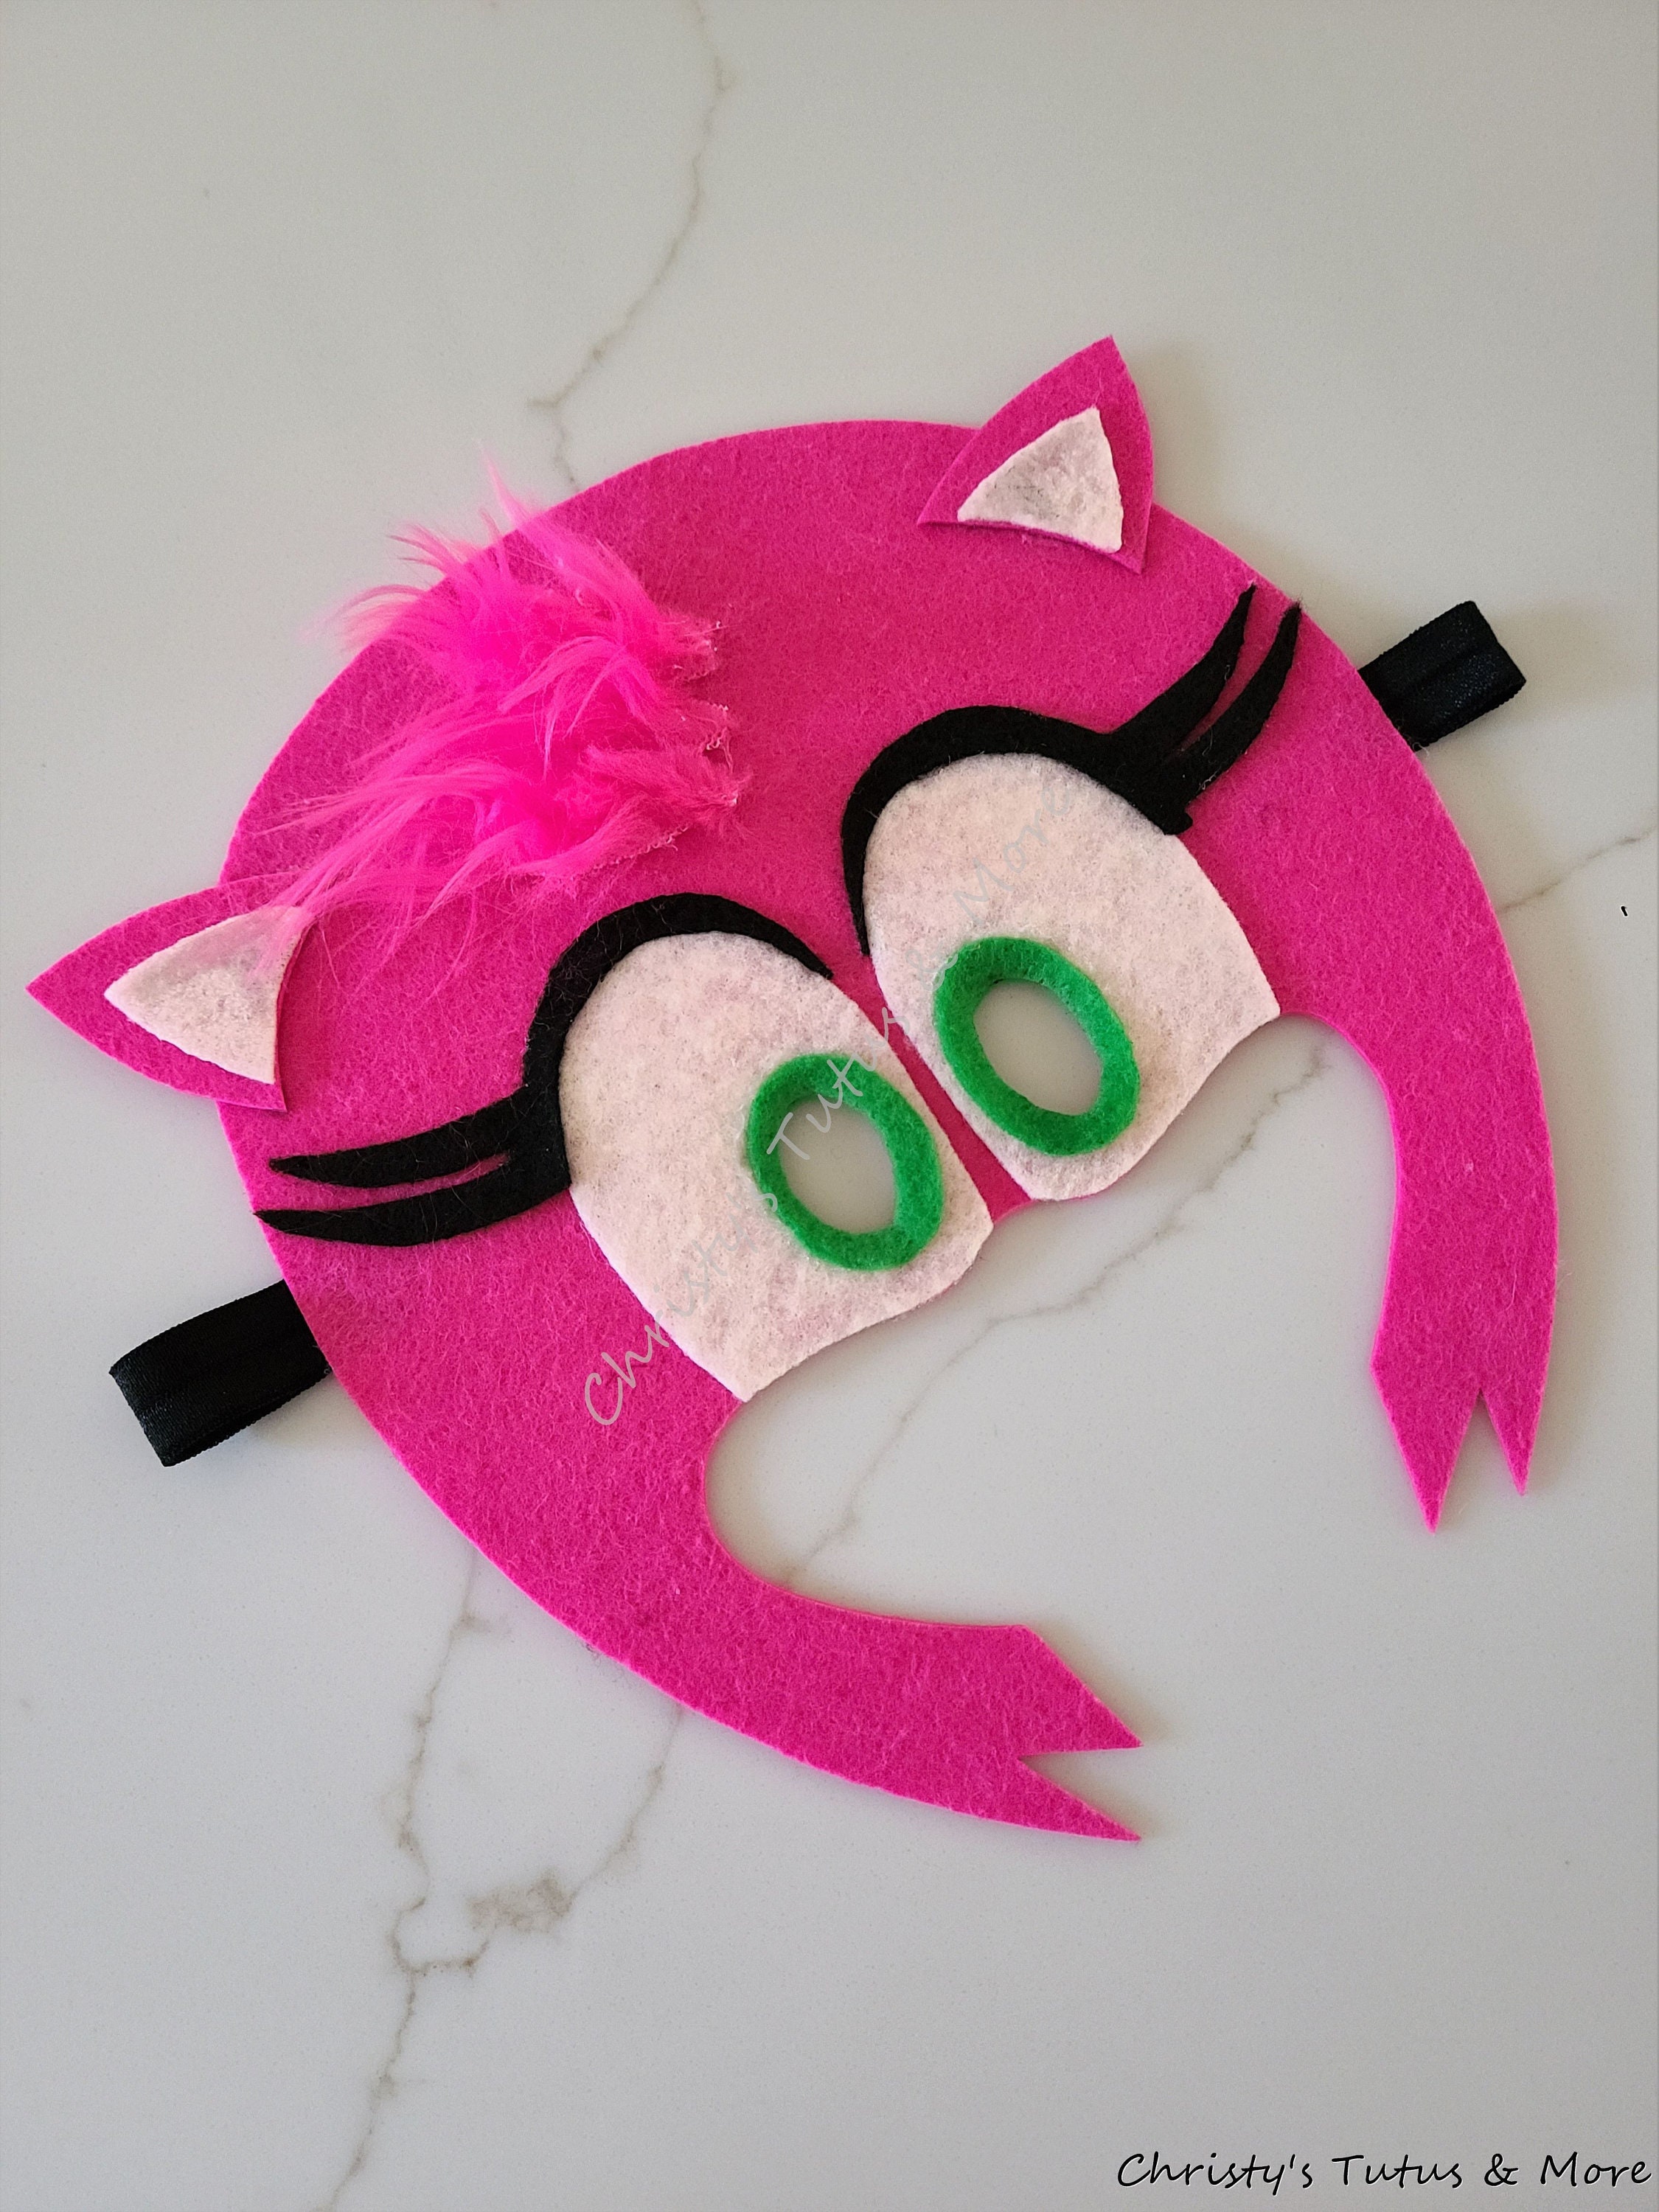 amy rose cosplay - Google Search  Amy rose, Sonic costume, Cute